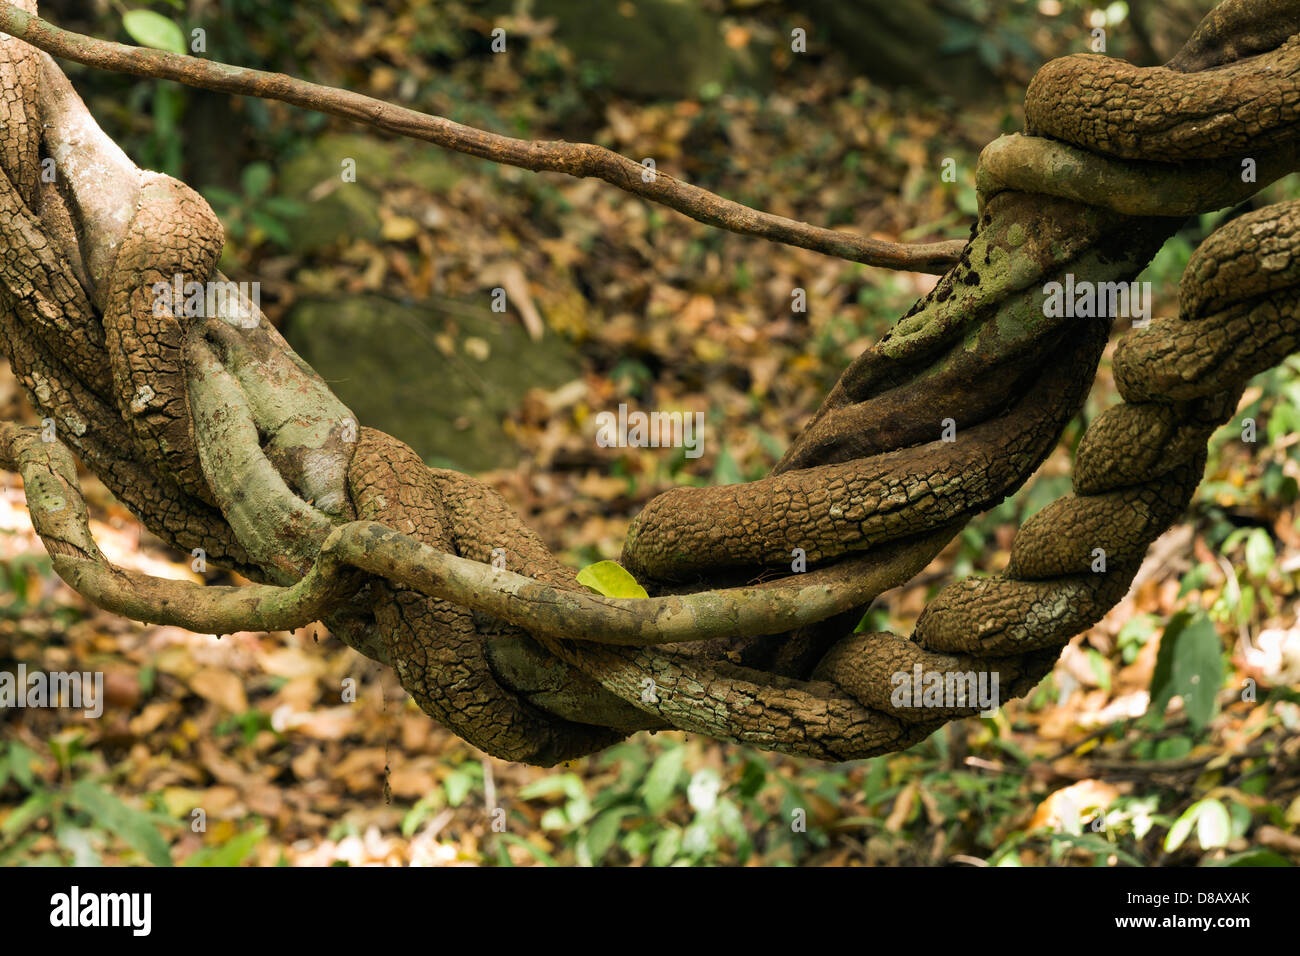 Three different vines doing the twist in the jungle by Kbal Spean, a remote Angkorian site near Angkor in Cambodia Stock Photo